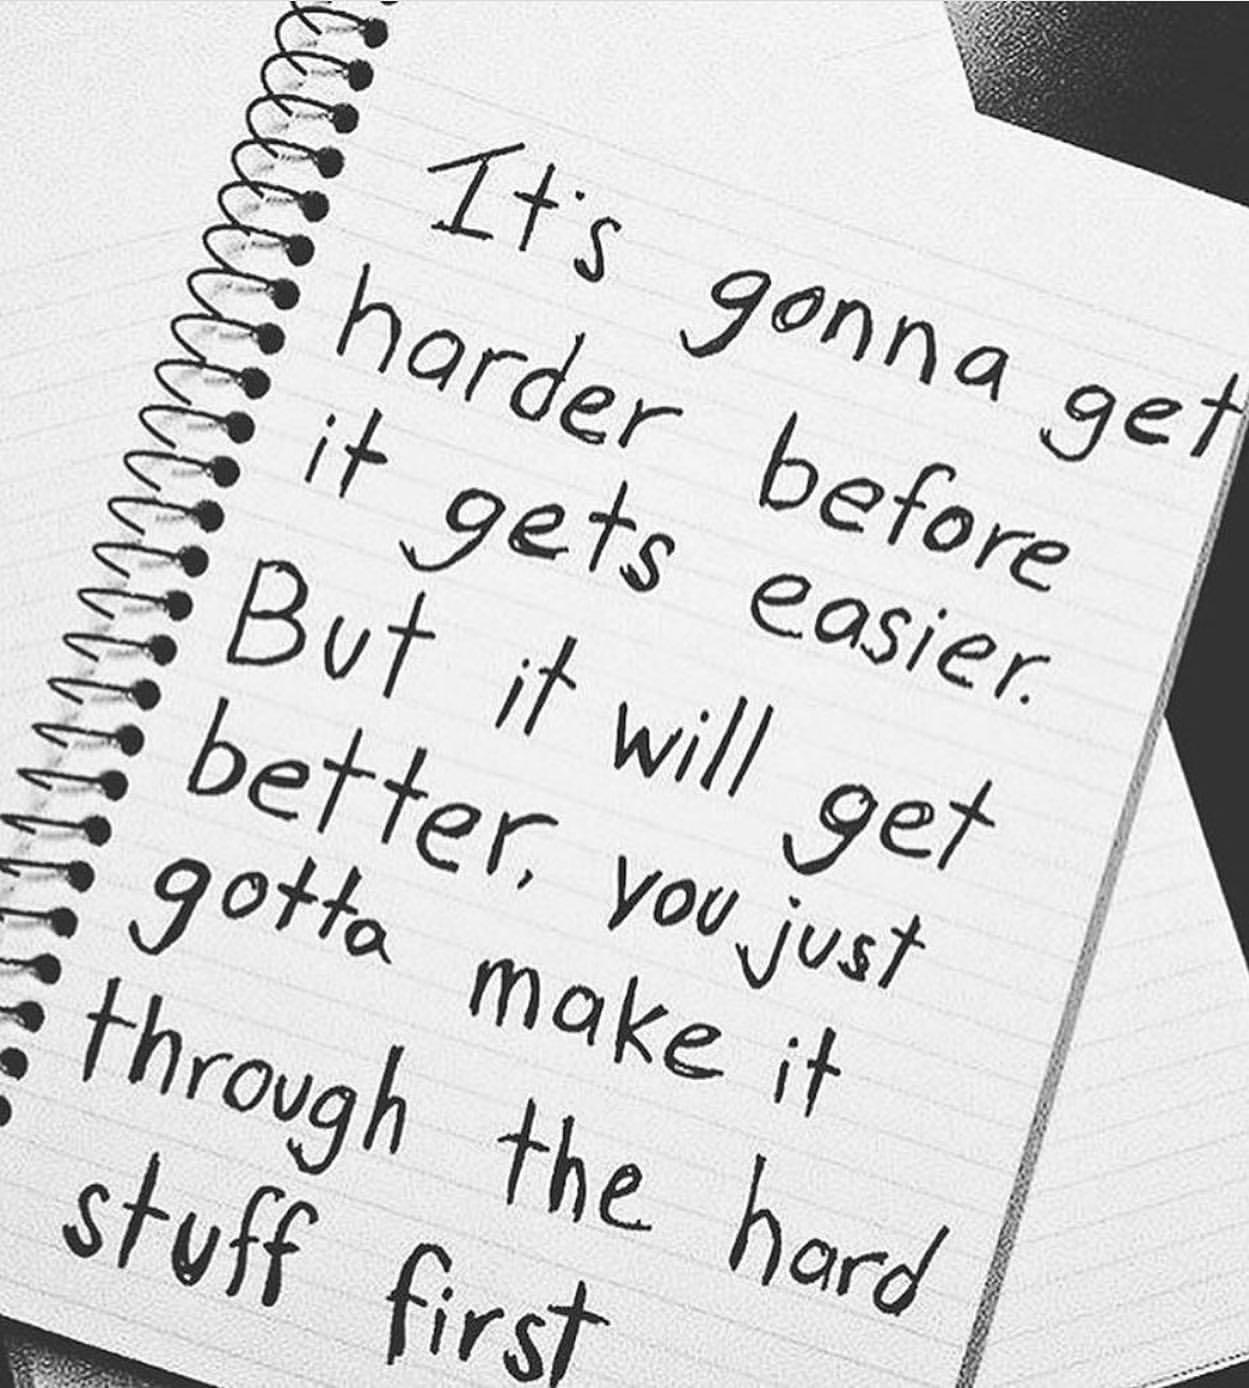 It's gonna get harder before it gets easier. But it will get better, you just gotta make it though the hard stuff first.